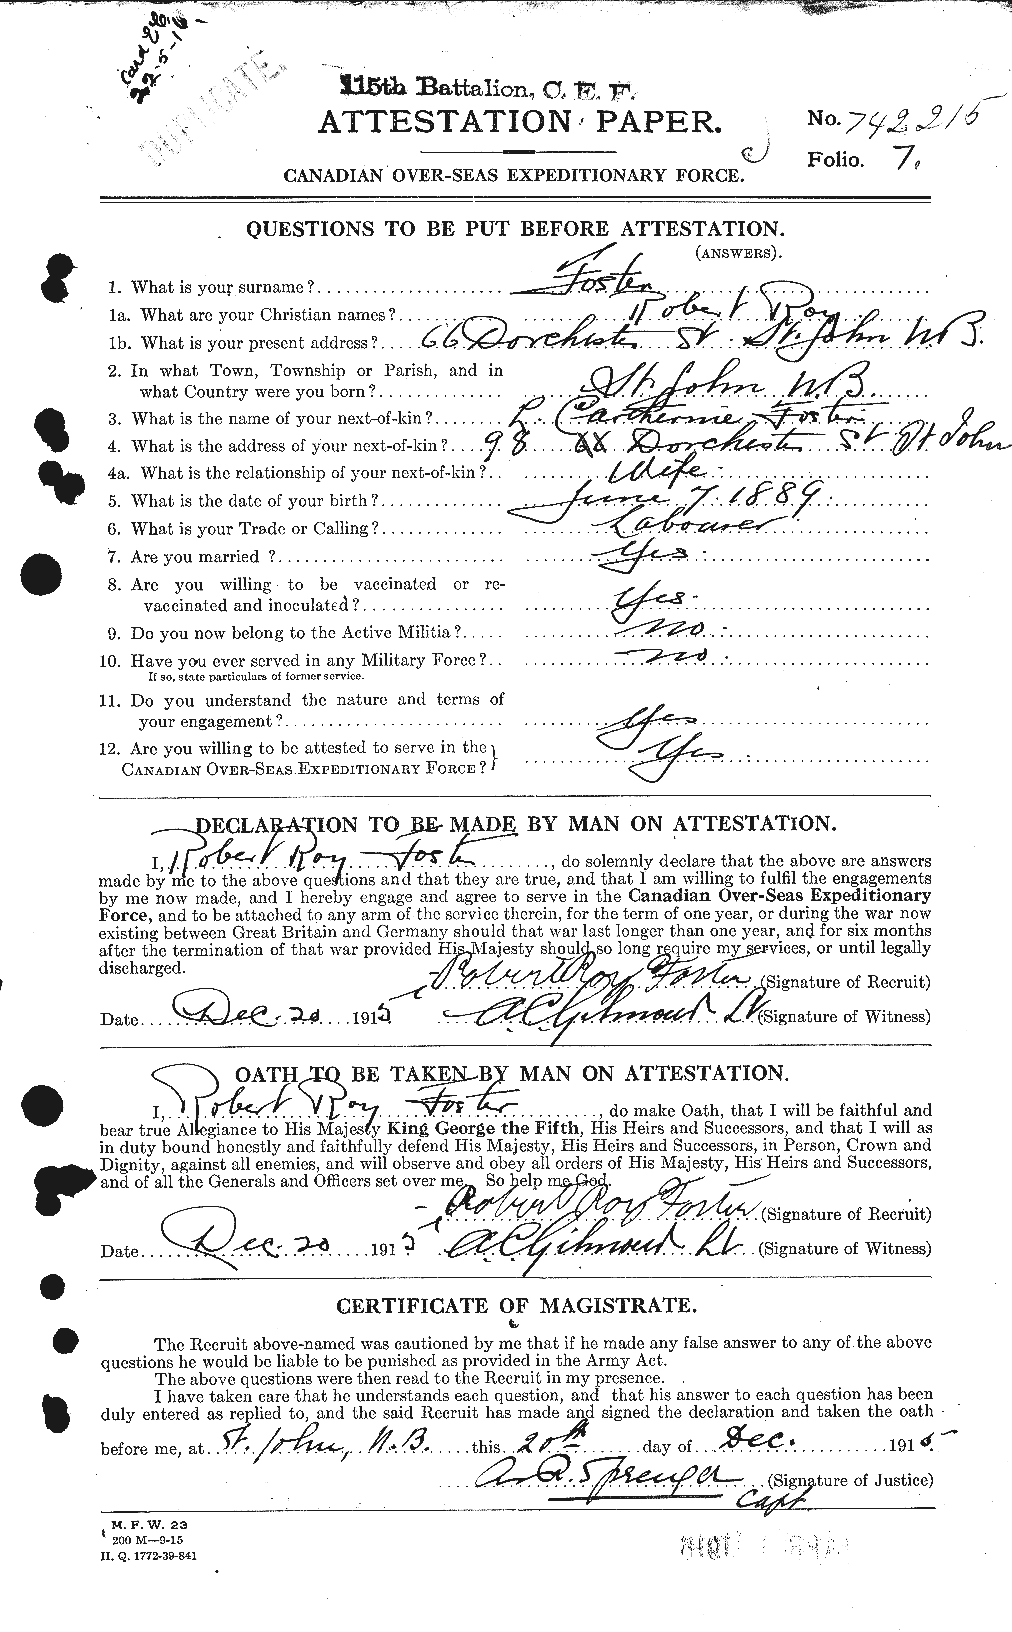 Personnel Records of the First World War - CEF 335186a